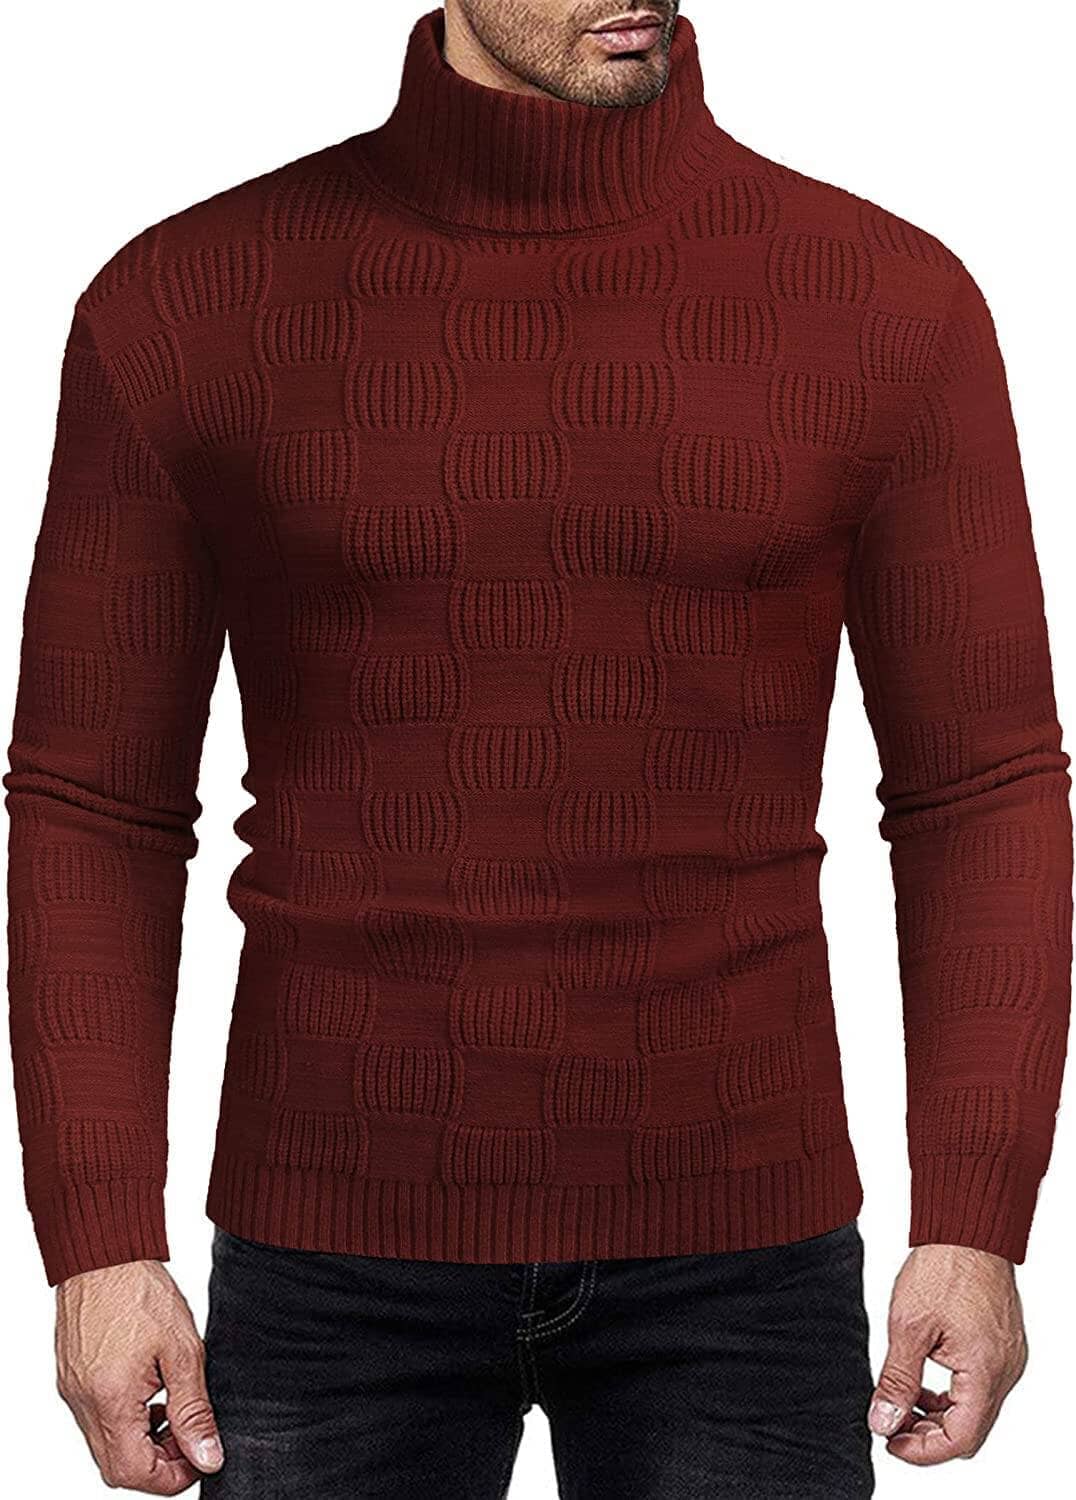 Men's Knitted Turtleneck Sweater Plaid Hightneck Long Sleeve Sweater (US Only) Sweaters COOFANDY Store Wine Red S 